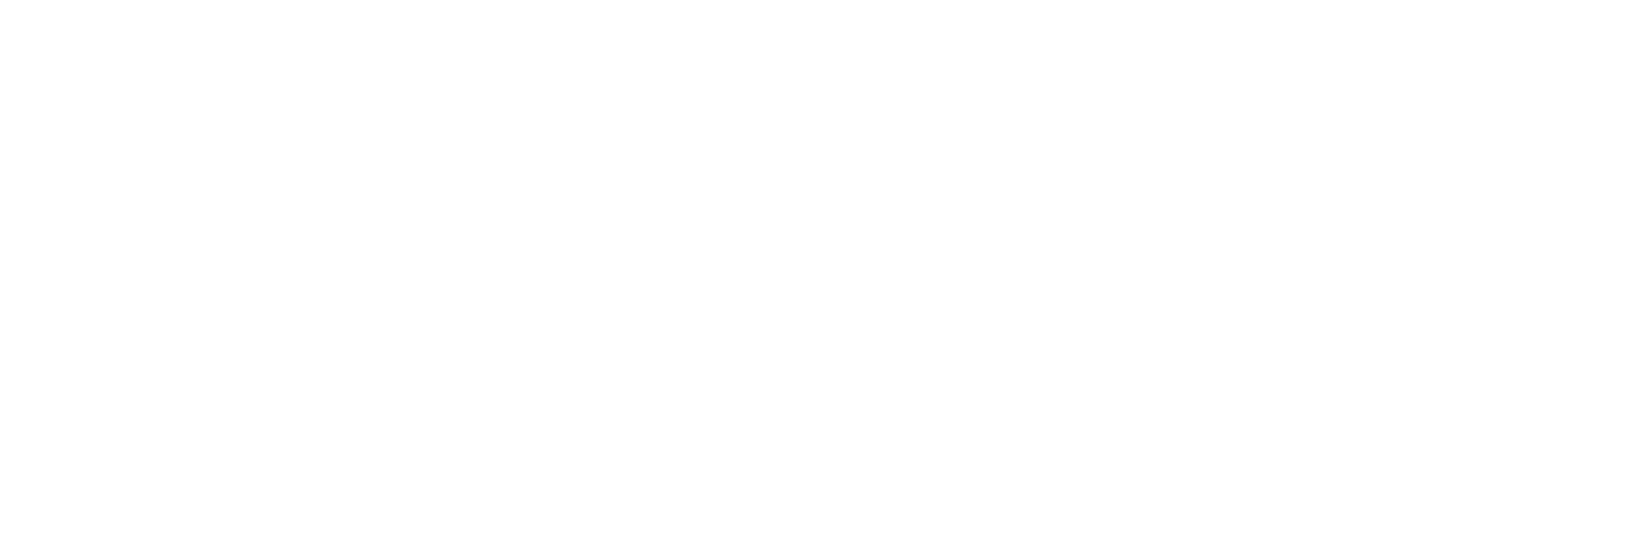 Lam Research logo large for dark backgrounds (transparent PNG)